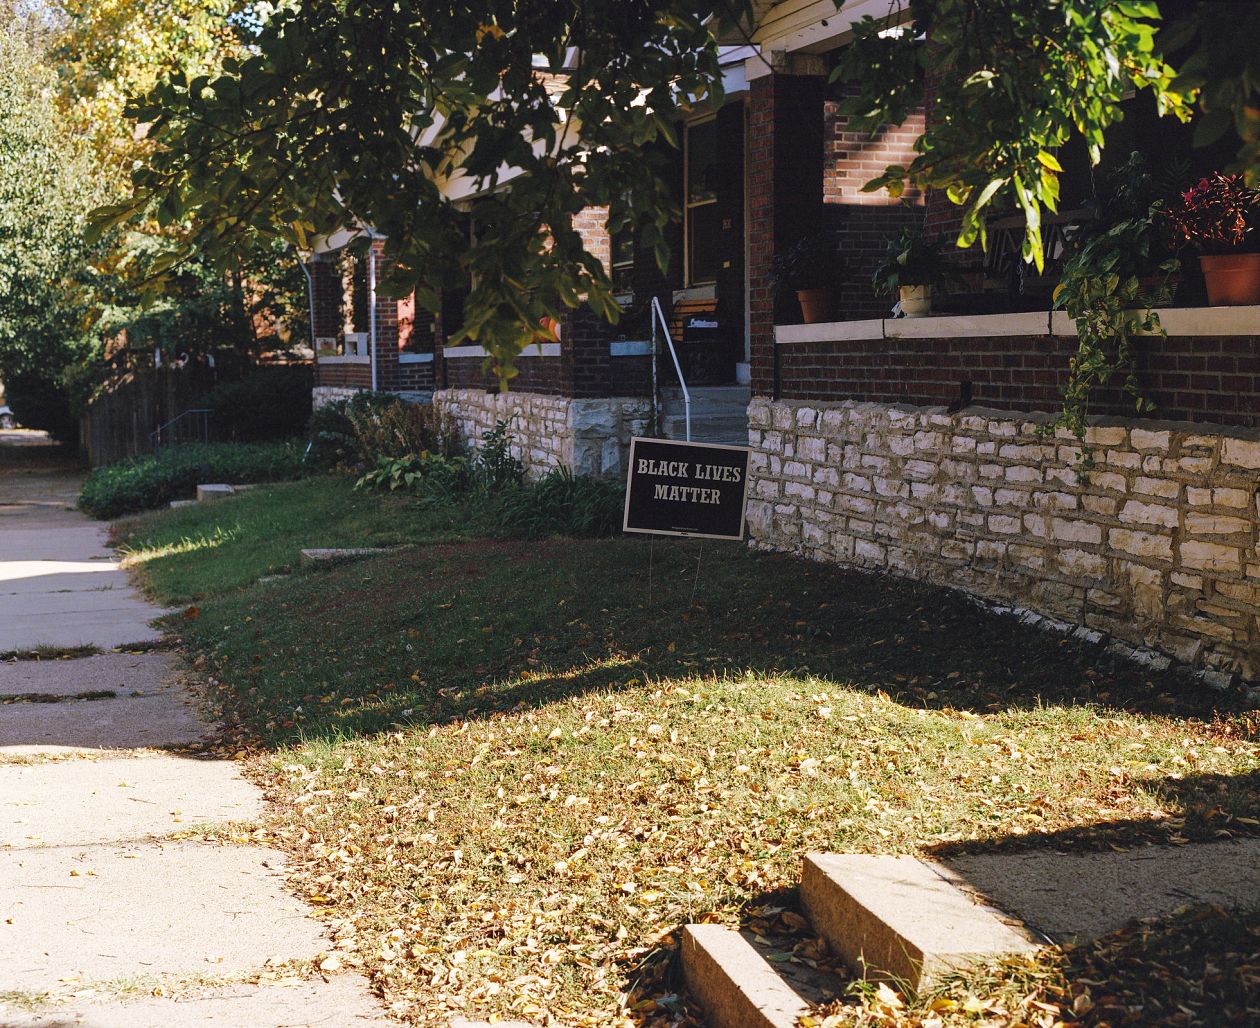 Autumn leaves in front of a house building with a black lives matter sign.